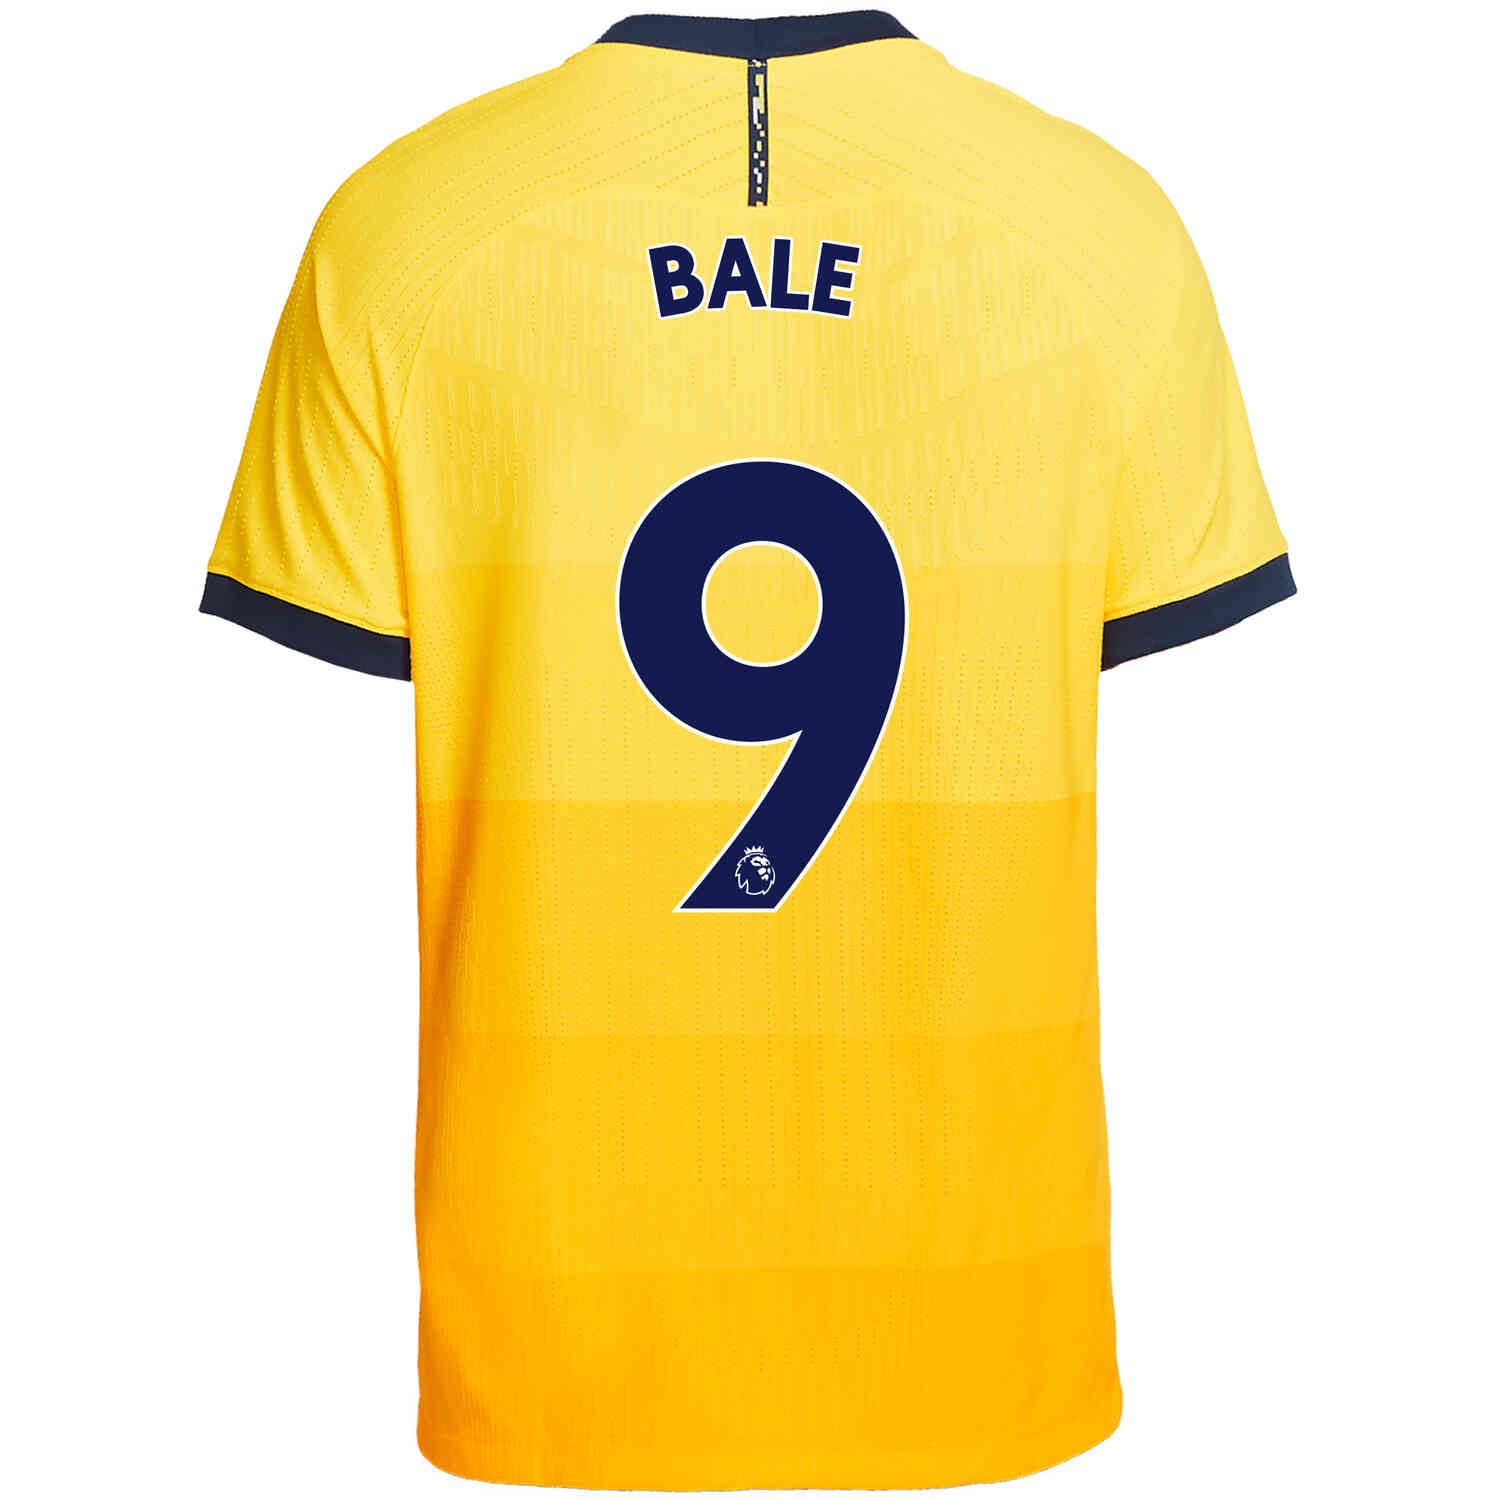 Gareth Bale takes new shirt number at Tottenham after return to